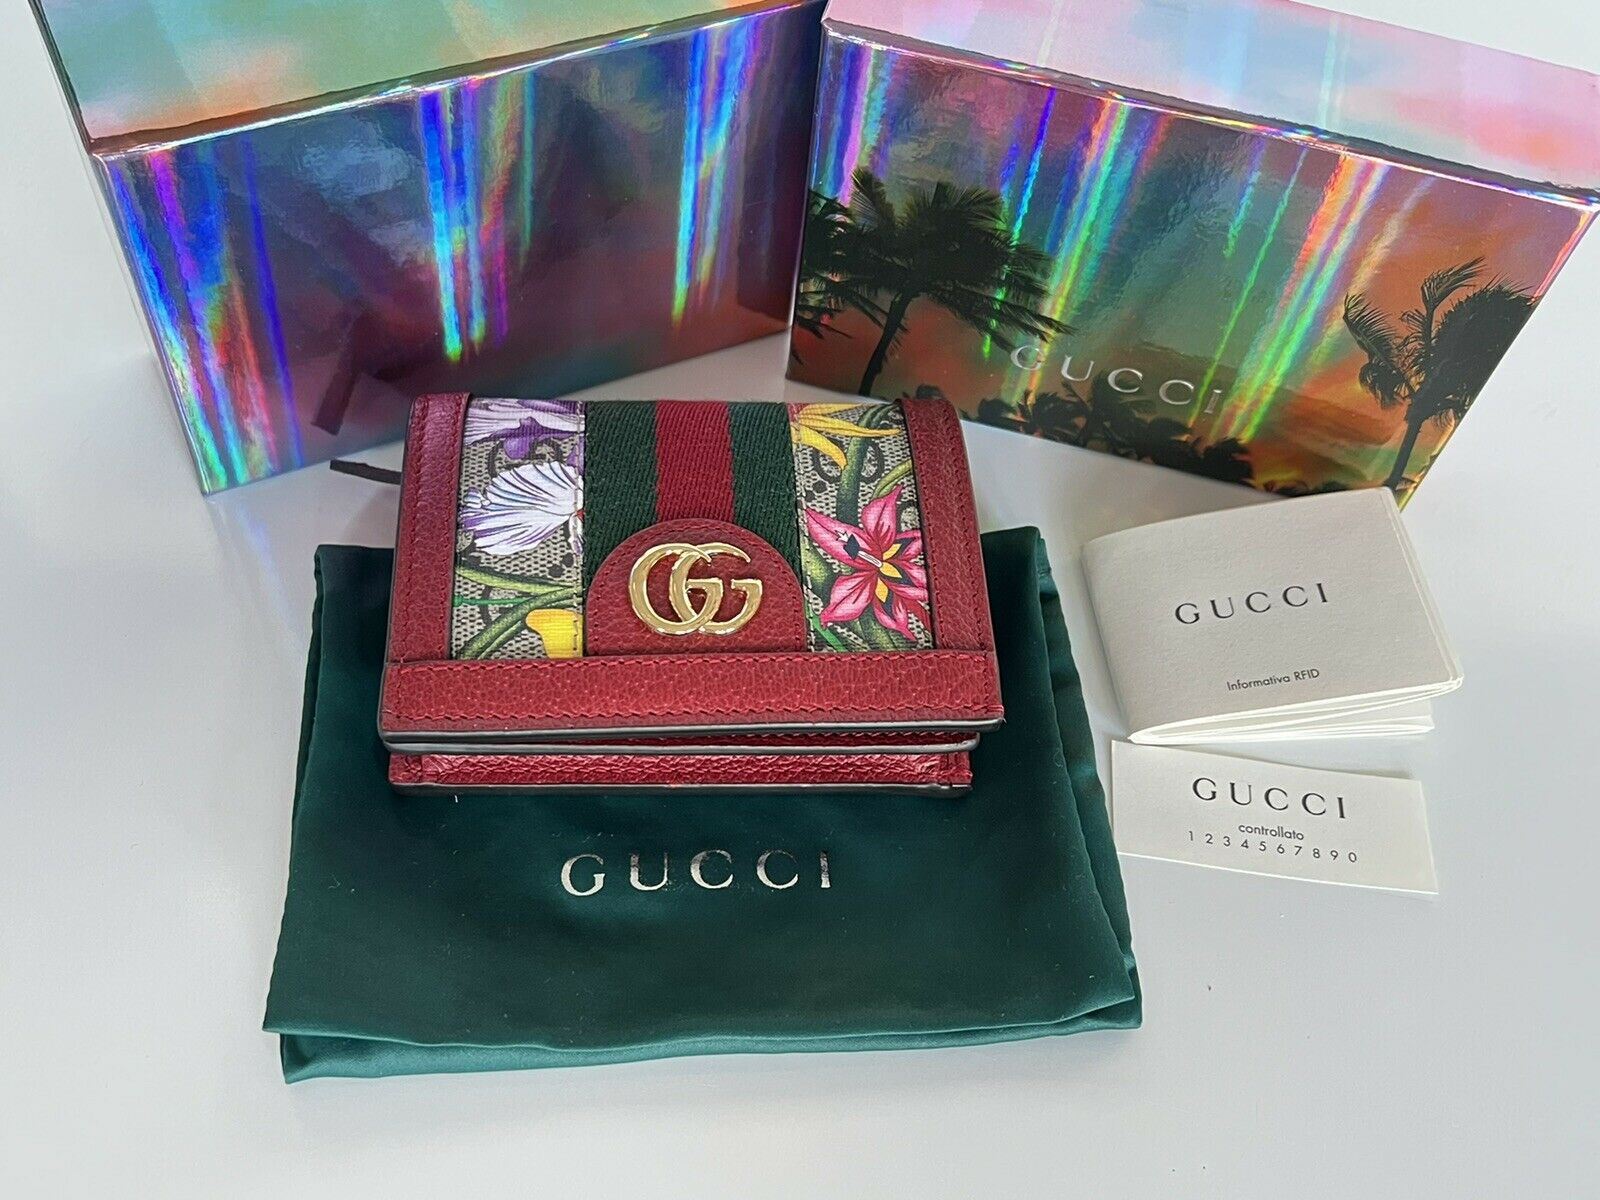 GUCCI Ophidia Flora GG Supreme Canvas Card Case Wallet Red 523155 - 10